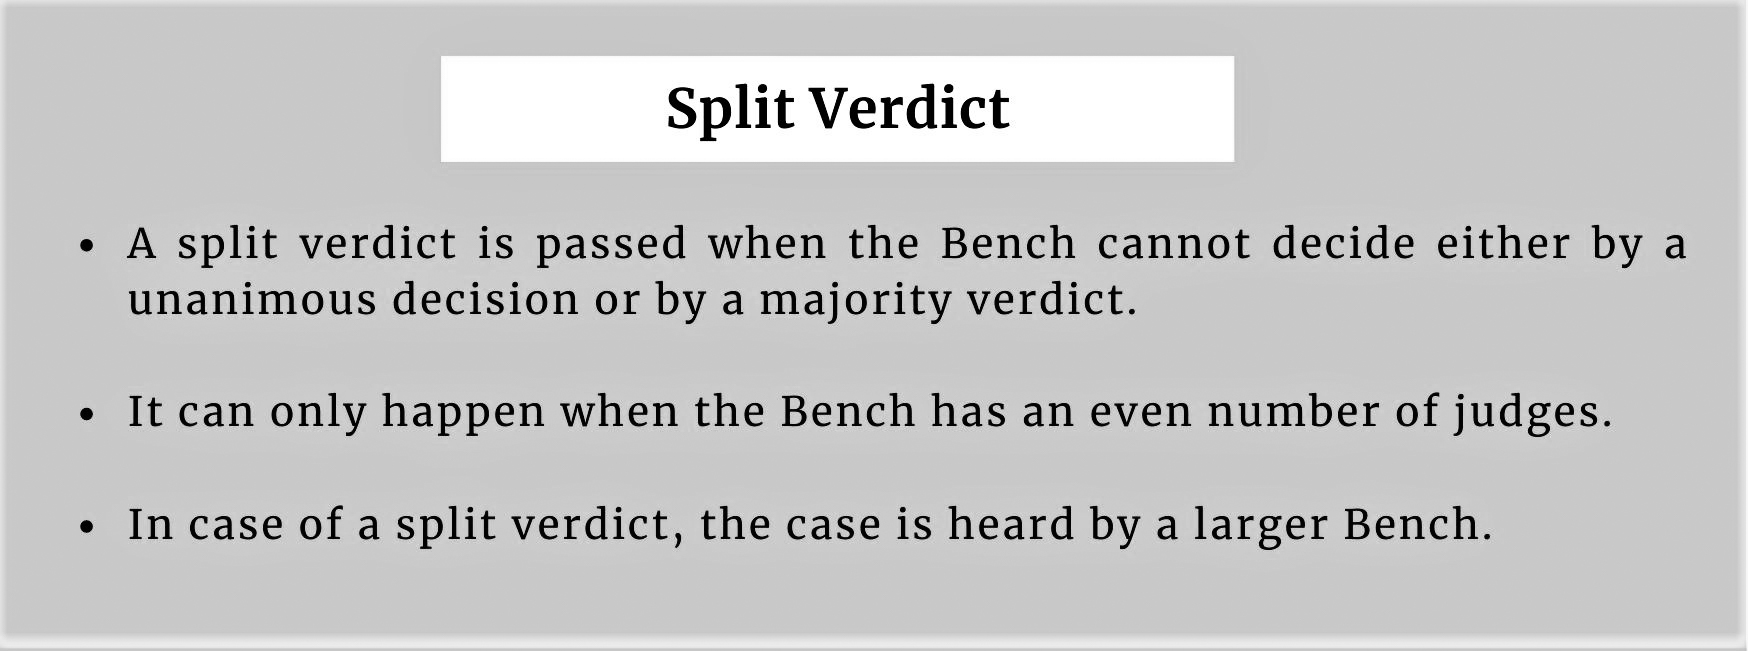 A split verdict is passed when the Bench cannot decide one way or the other in a case, either by a unanimous decision or by a majority verdict. Split verdicts can only happen when the Bench has an even number of judges.